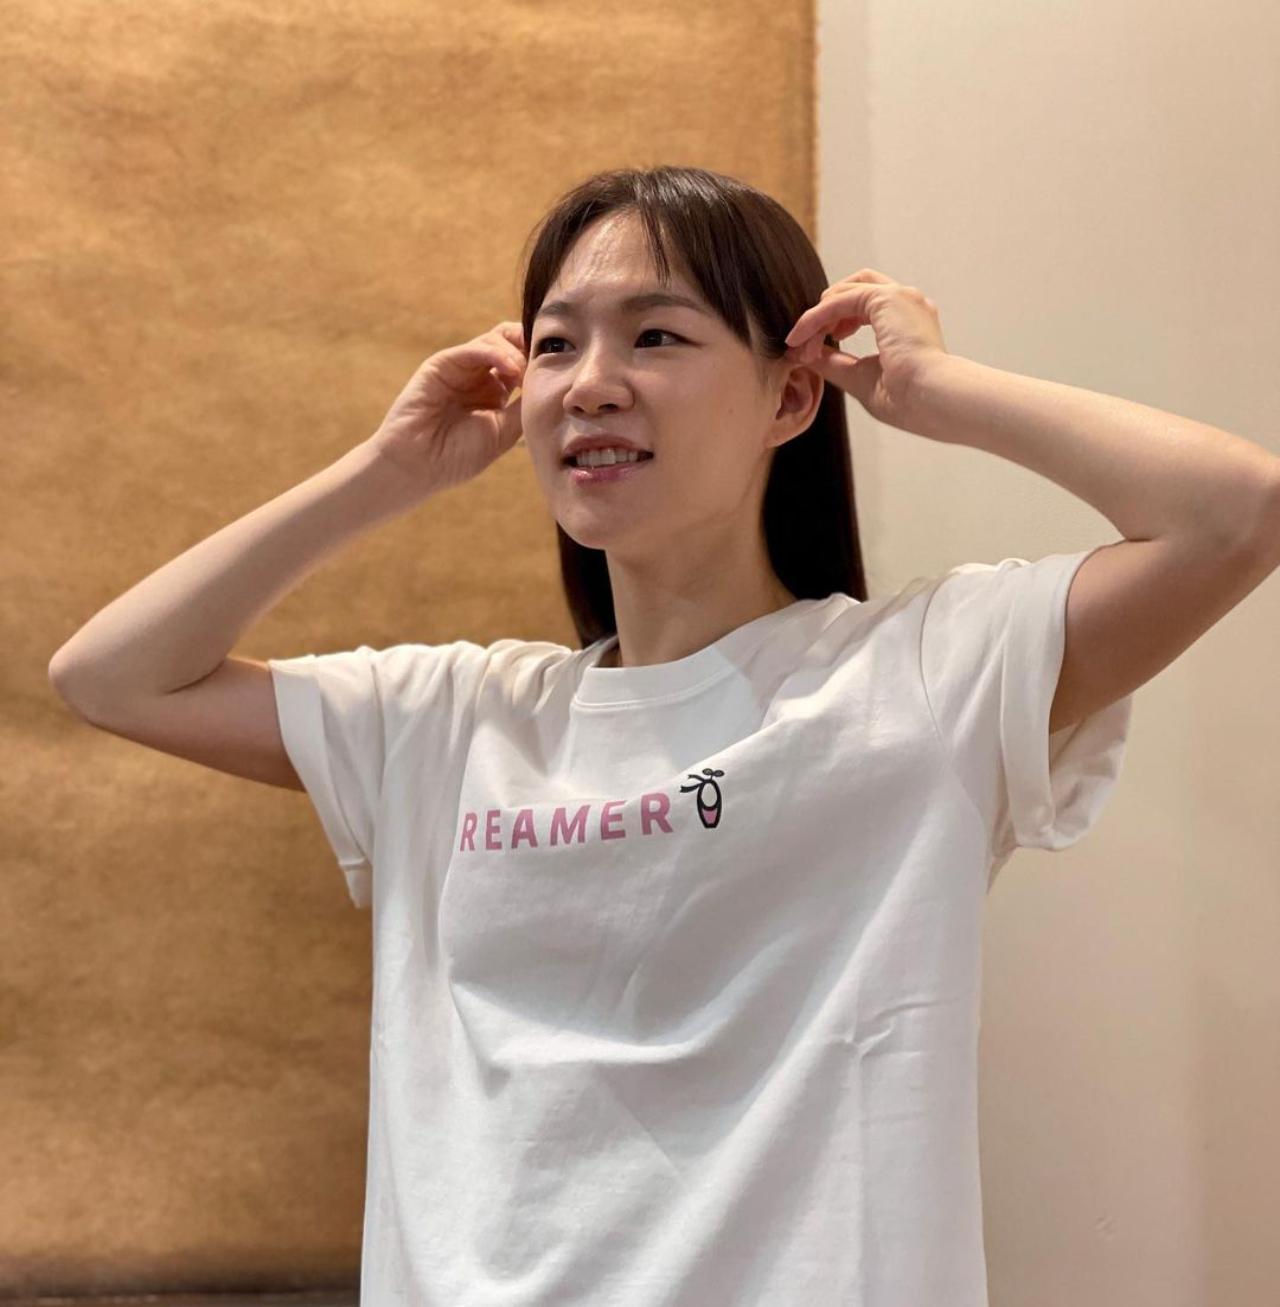 Han Ye-ri
Han Ye-ri’s acting career started off with short films and independent film projects to. She rose to fame in the sports drama, 'As One' where she learned the Hamgyong dialect authentically depict North Korean table tennis player, Yu Sun-bok. Talk about dedication!